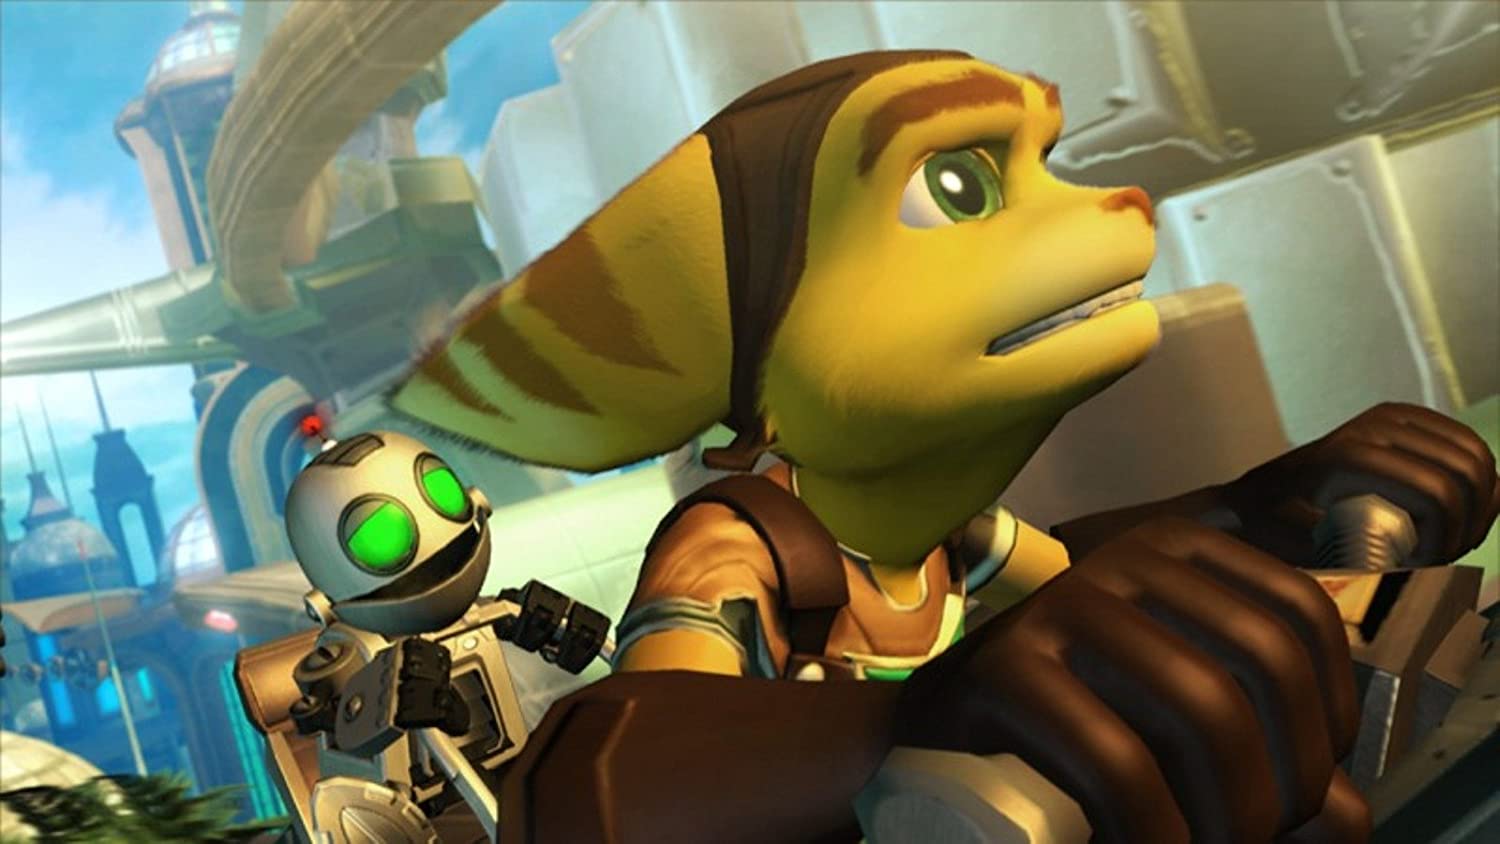 Ratchet & Clank on PS4: Extended Gameplay